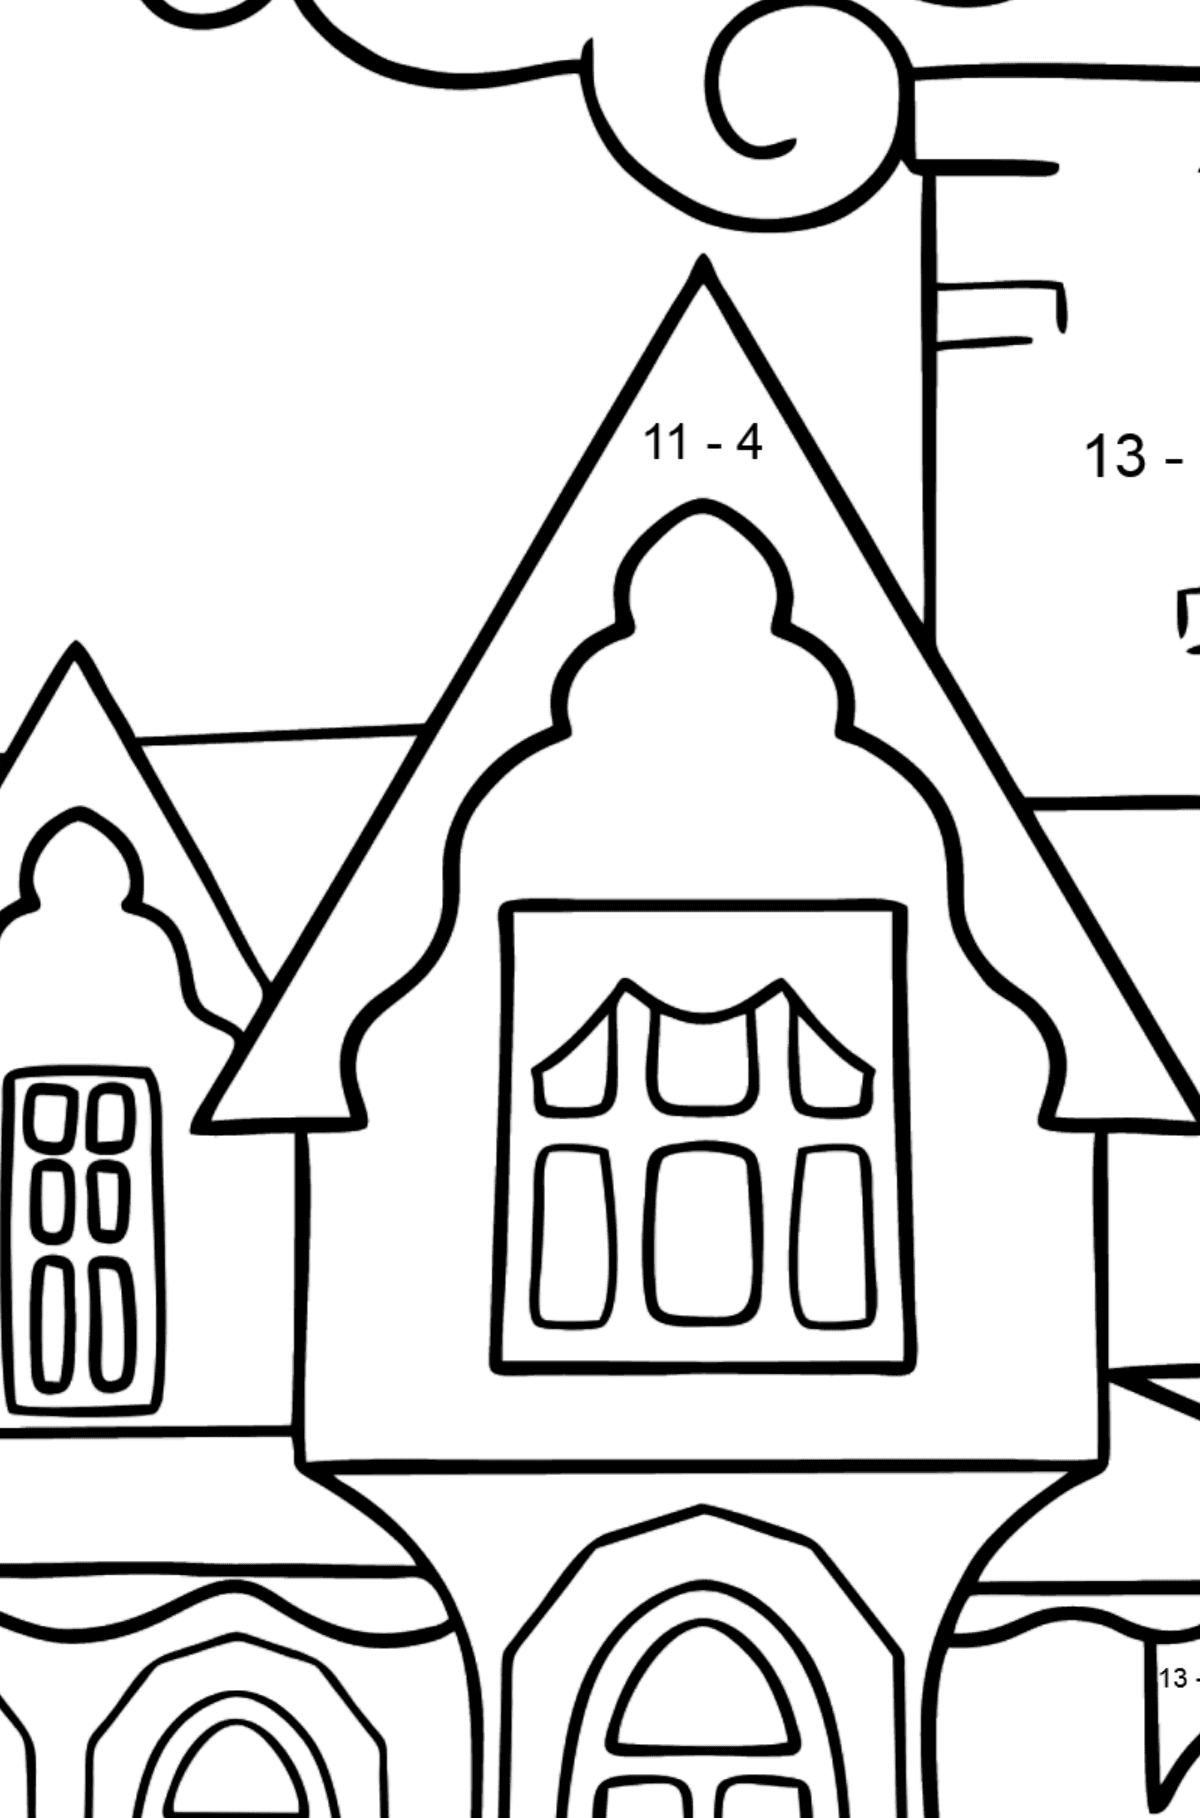 Simple Coloring Page - A Miraculous House - Math Coloring - Subtraction for Kids